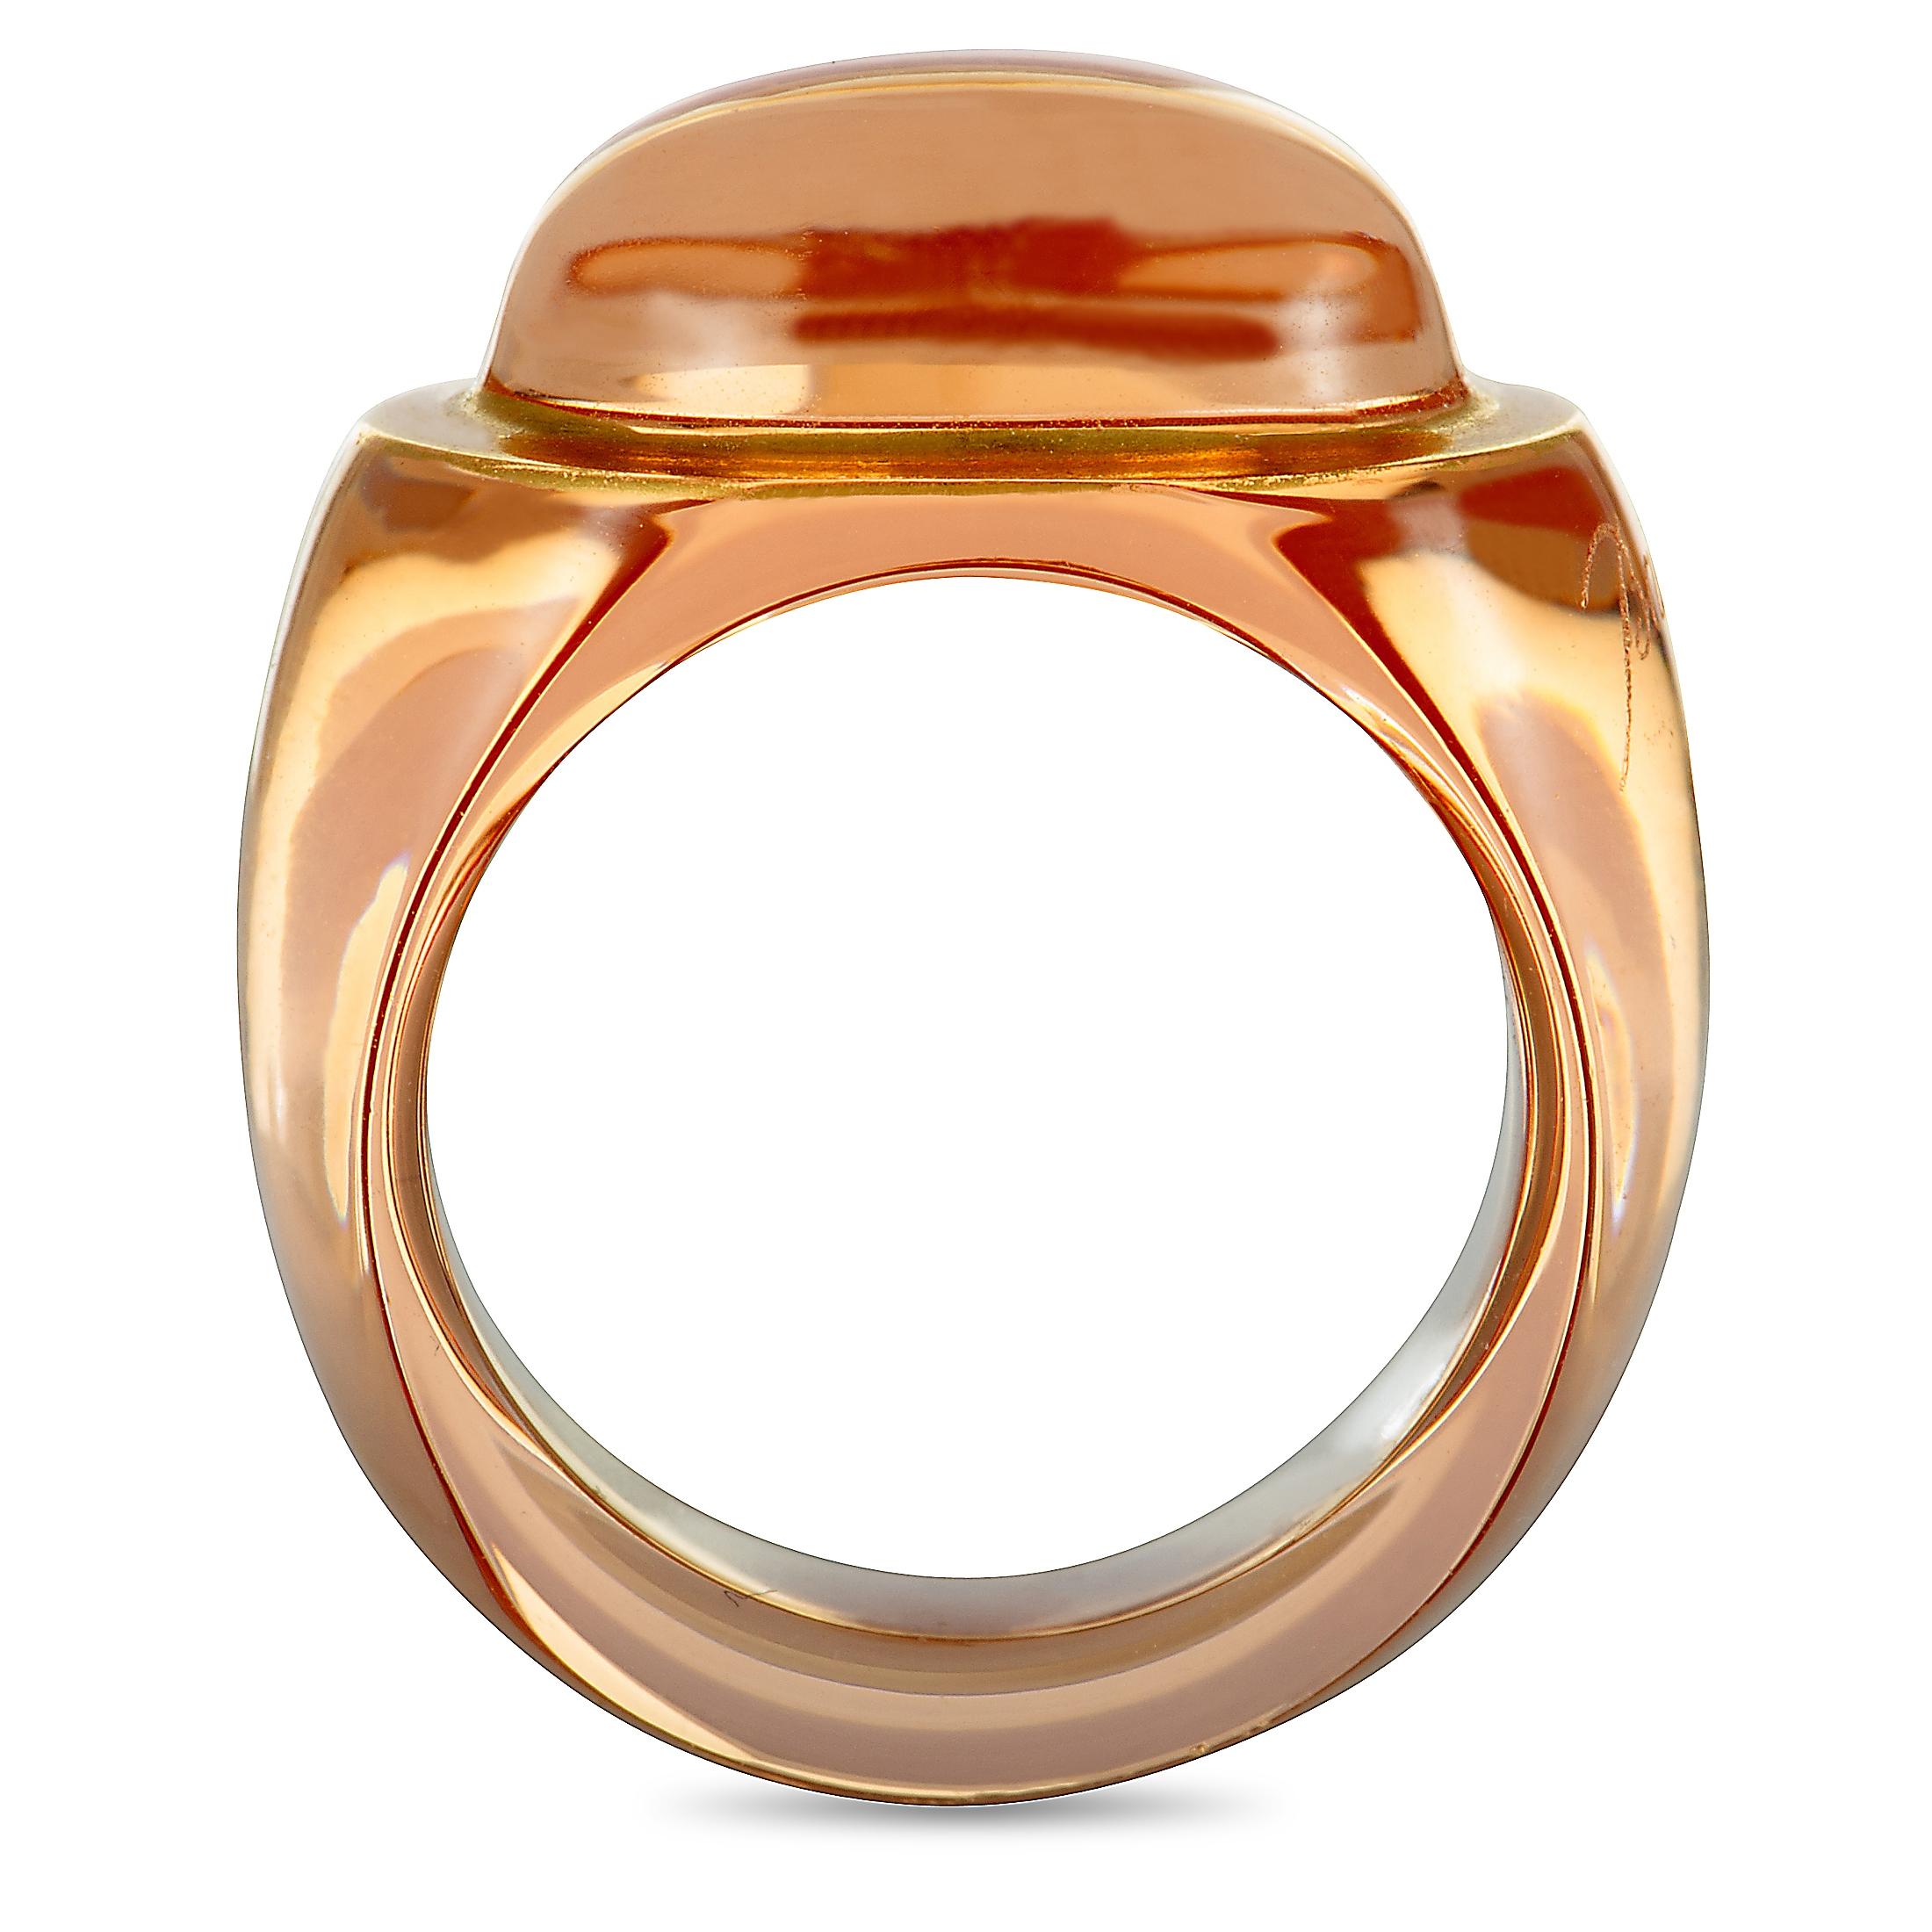 This Baccarat ring is made out of 18K yellow gold and crystal and weighs 6.2 grams. It boasts band thickness of 5 mm and top height of 7 mm, while top dimensions measure 17 by 13 mm.

Offered in estate condition, this jewelry piece includes a gift